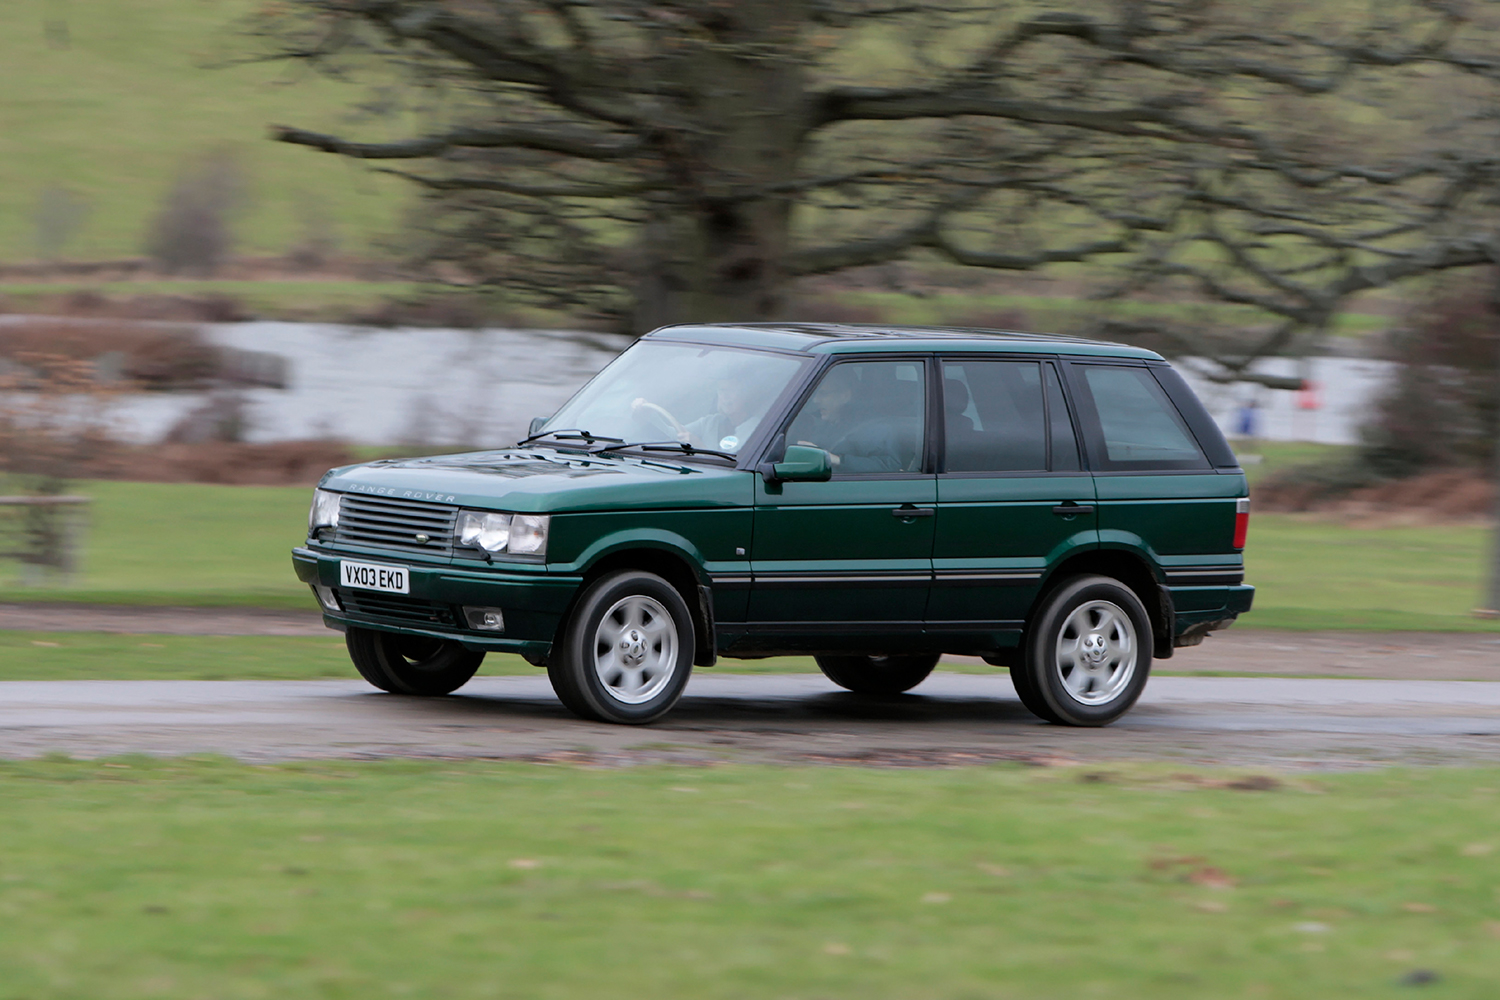 The second-generation Range Rover P38A driving at Eastnor Castle in December 2012, marking 50 years of off-road testing at the U.K. castle